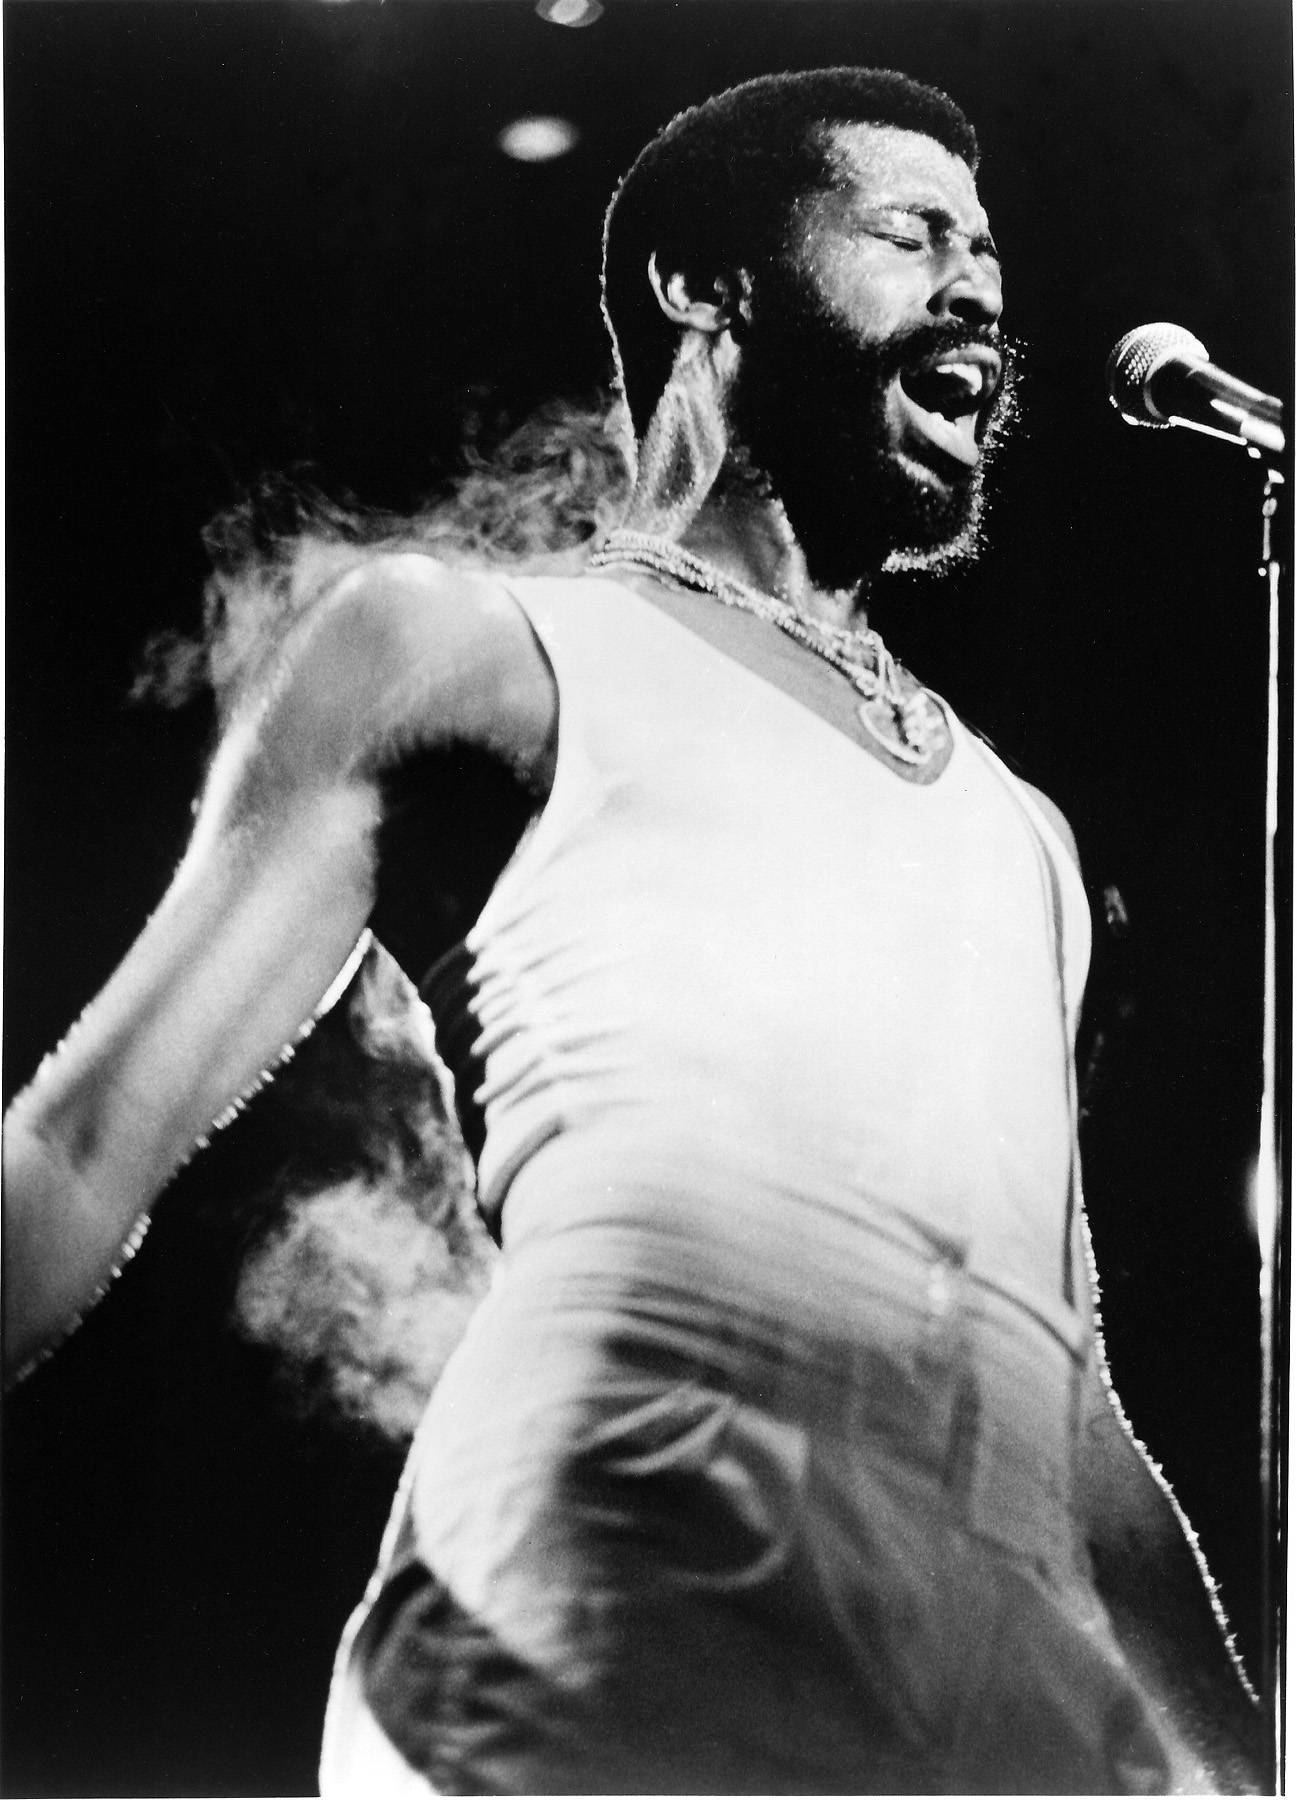 Mr. Solo Dolo - TP embarked on a highly successful solo music career with the release of his self-titled debut in 1977. It reached No. 5 on the R&amp;B charts and No. 17 on the pop charts. (Photo: Dalle /Landov)